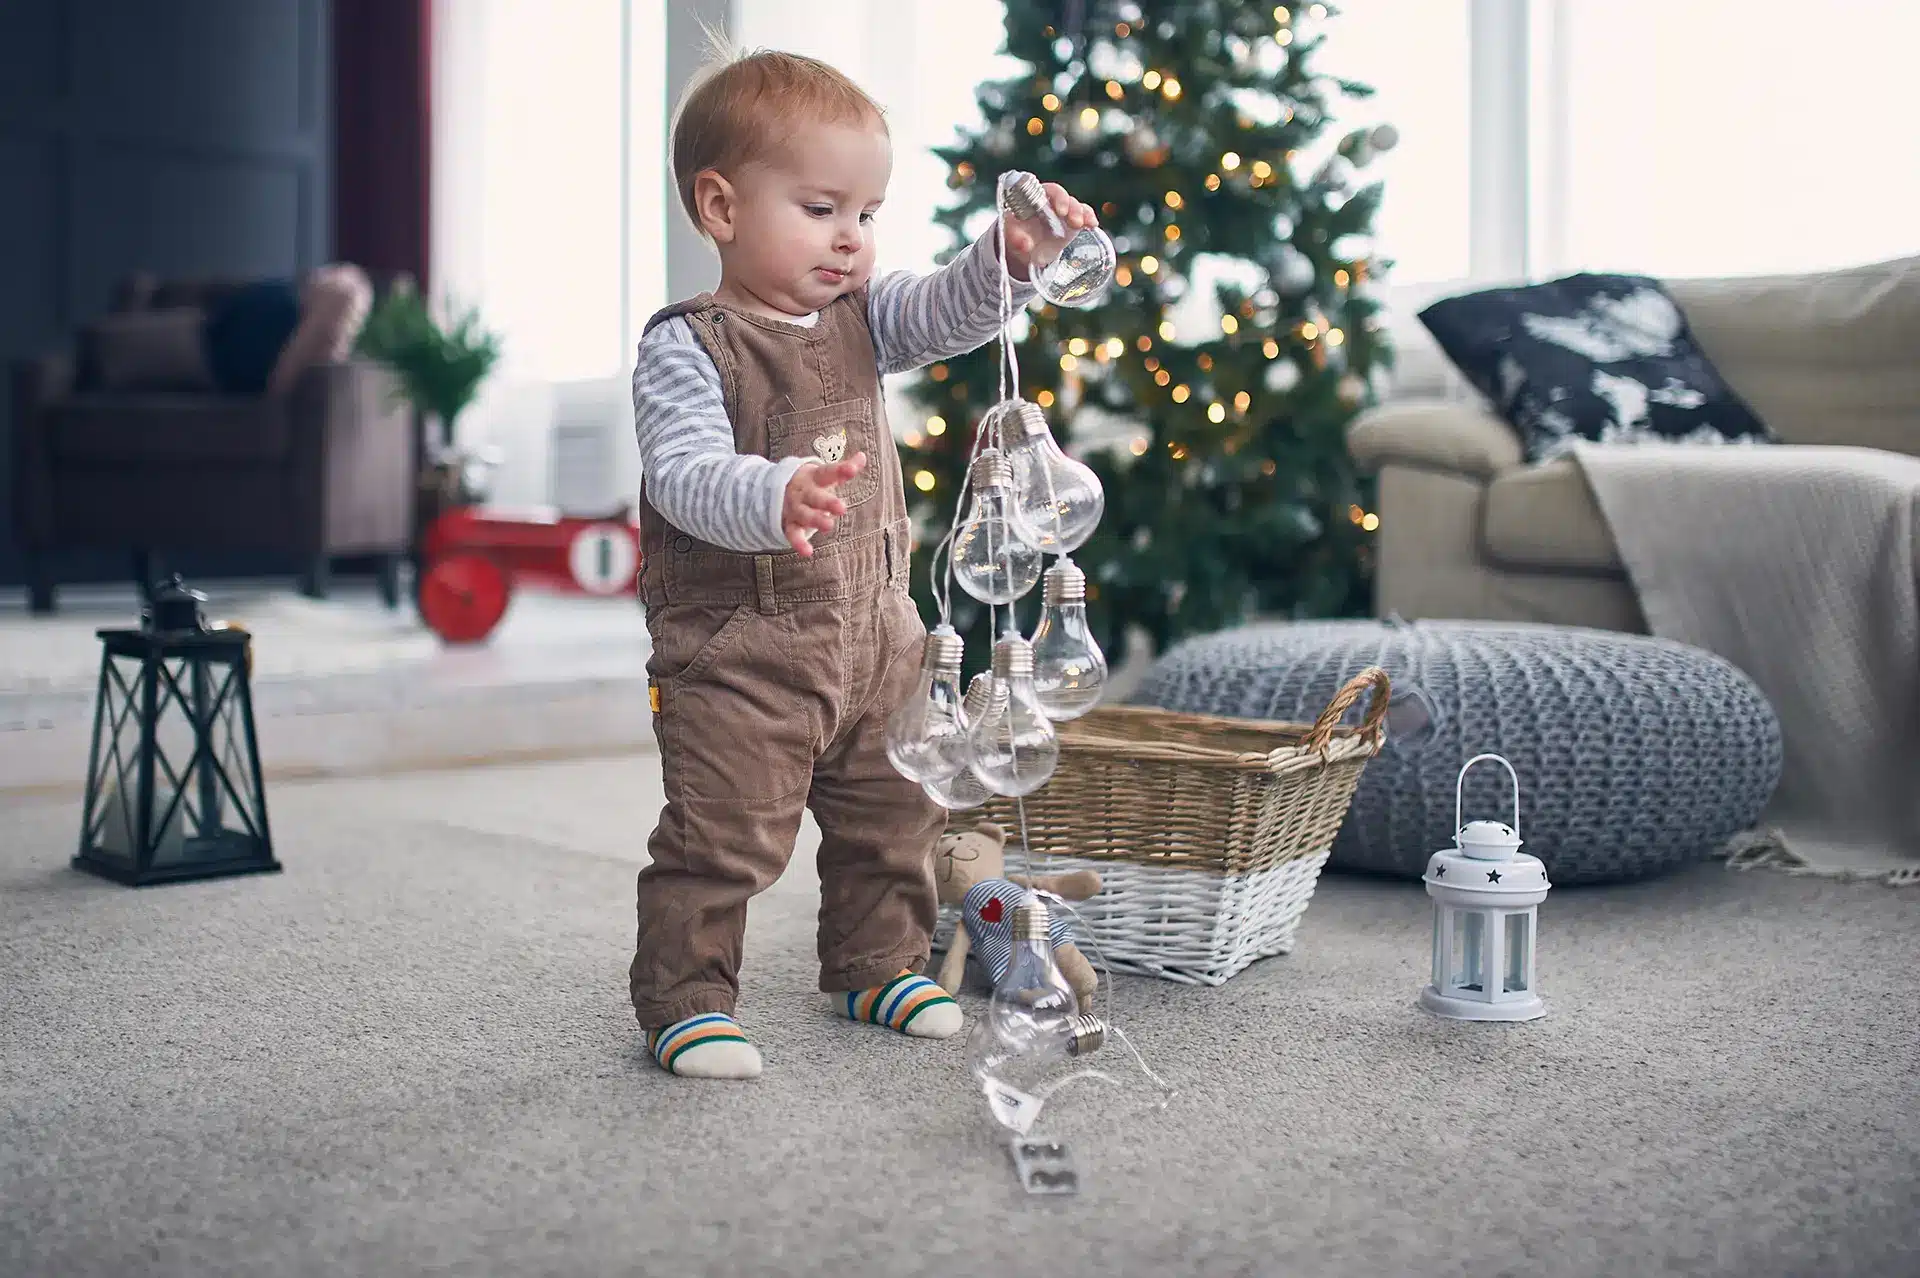 1-year-old playing with household objects